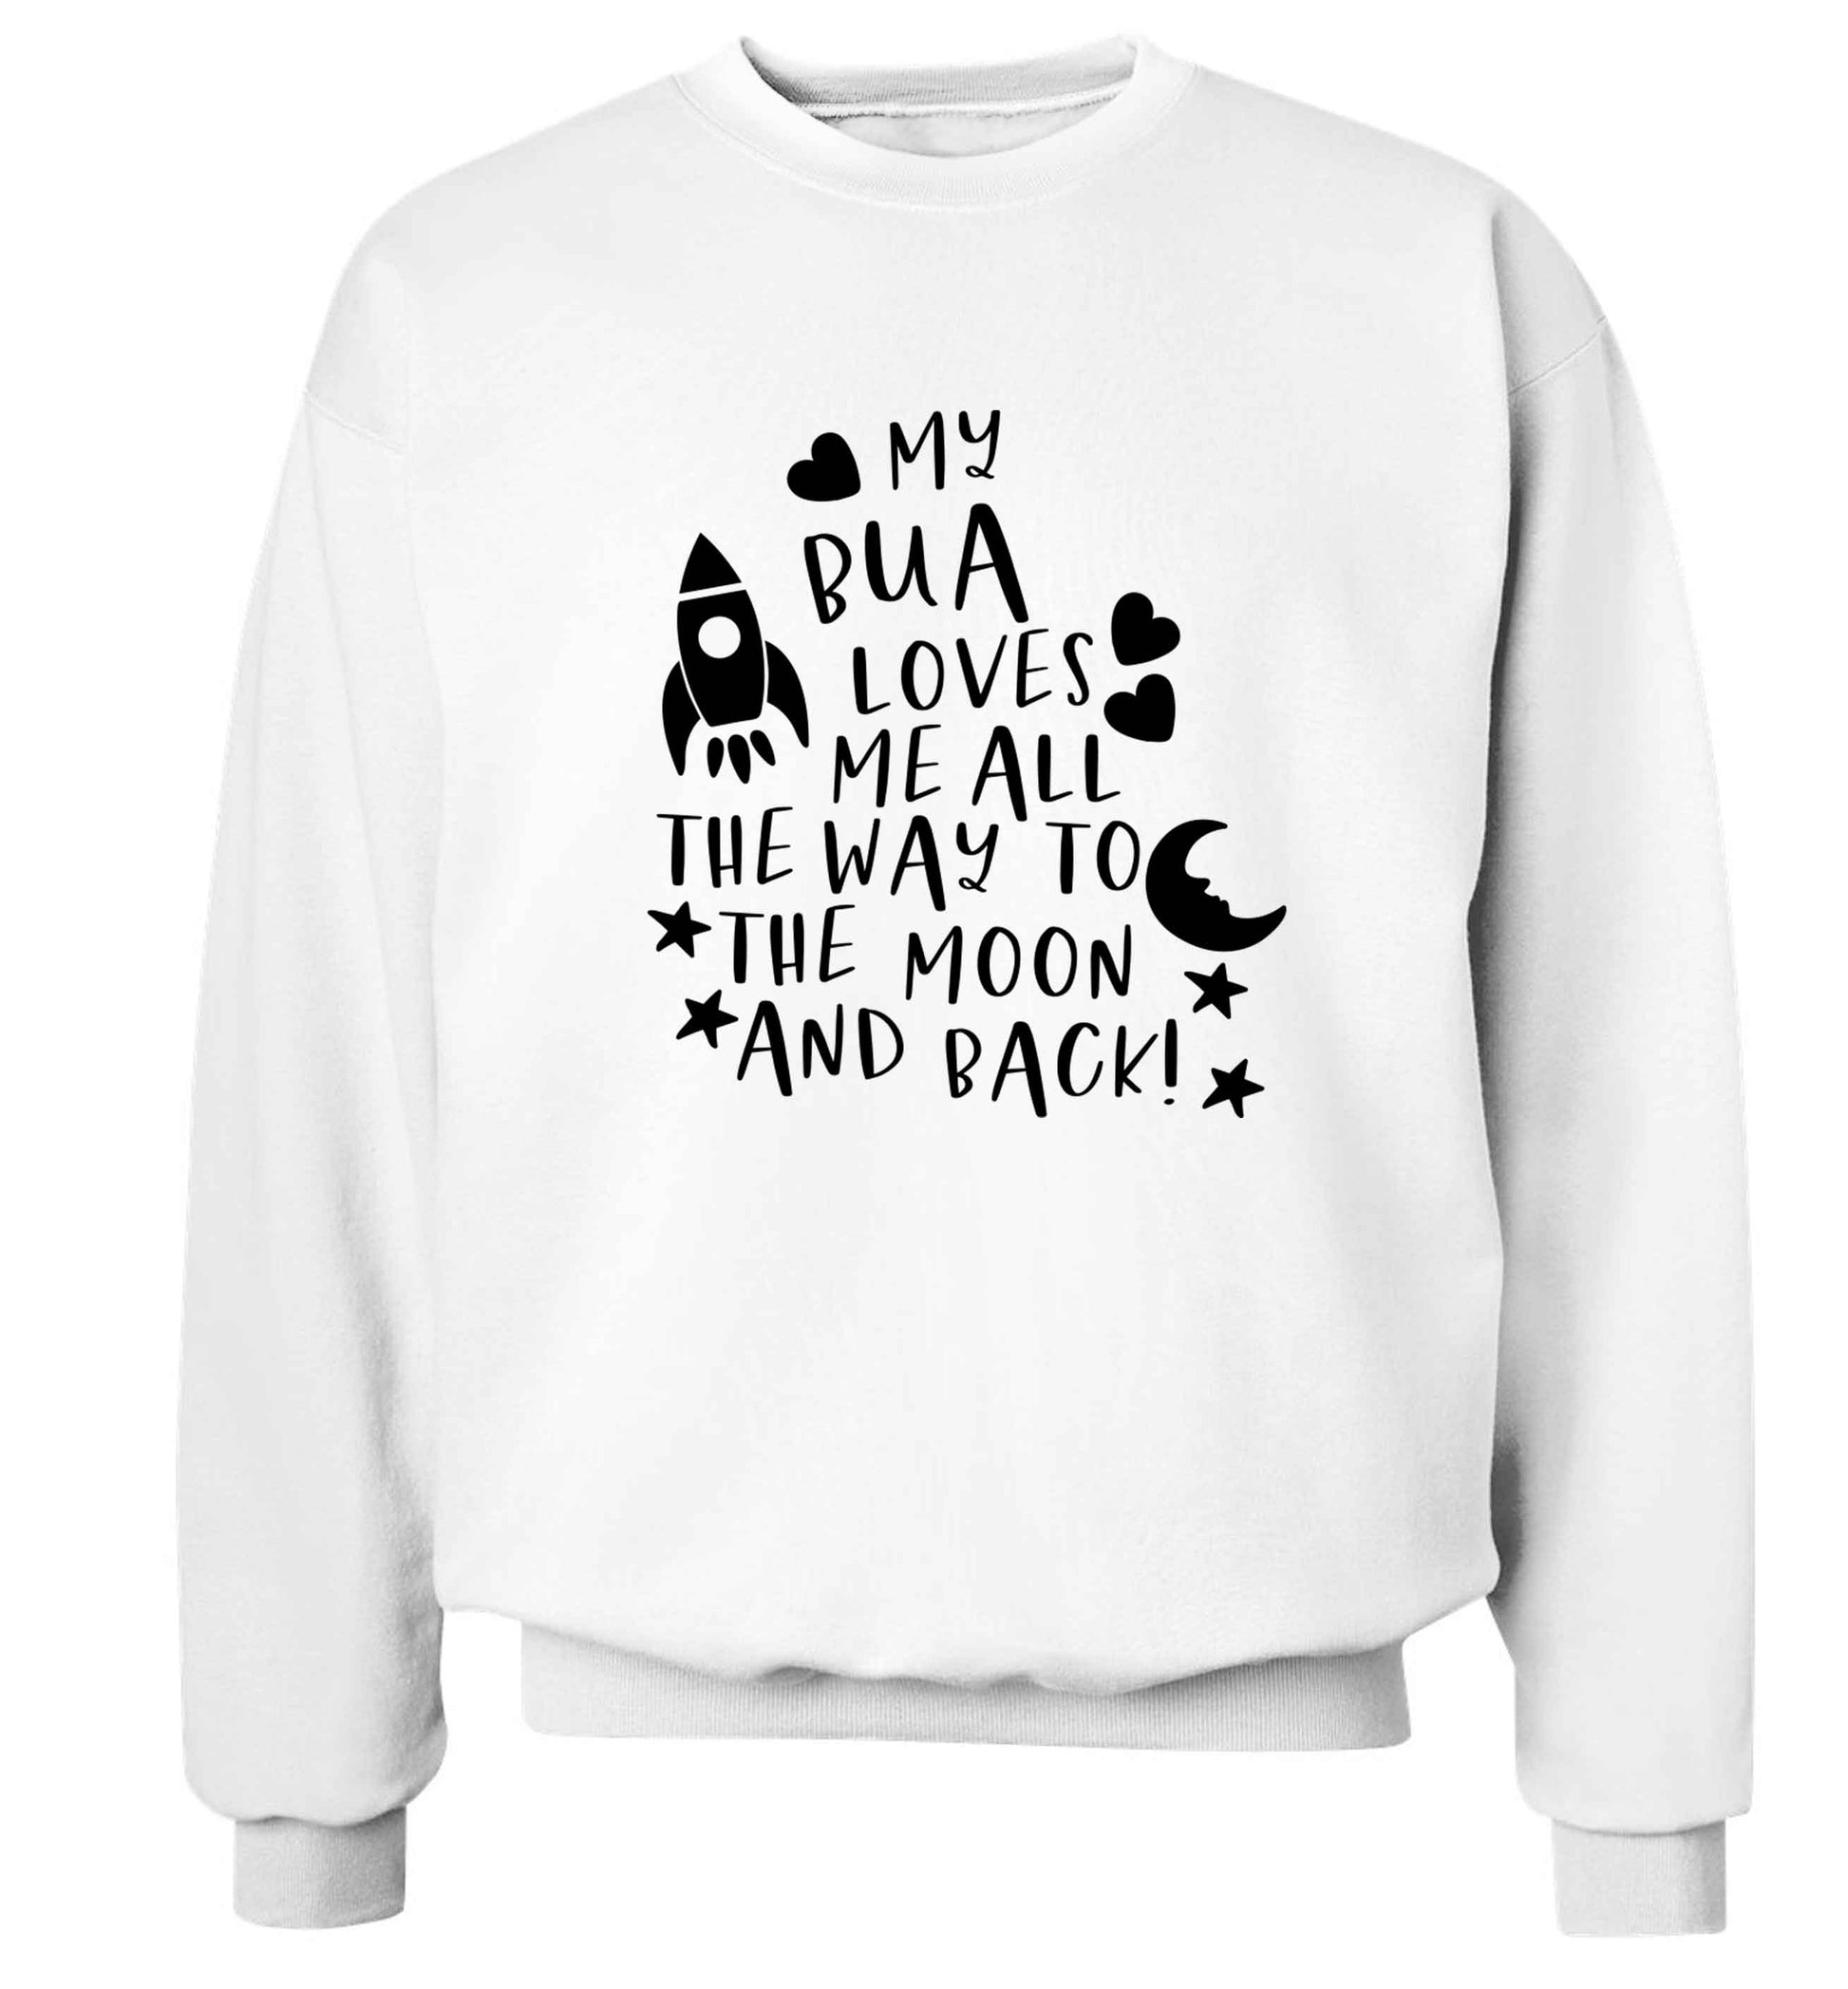 My bua loves me all they way to the moon and back Adult's unisex white Sweater 2XL